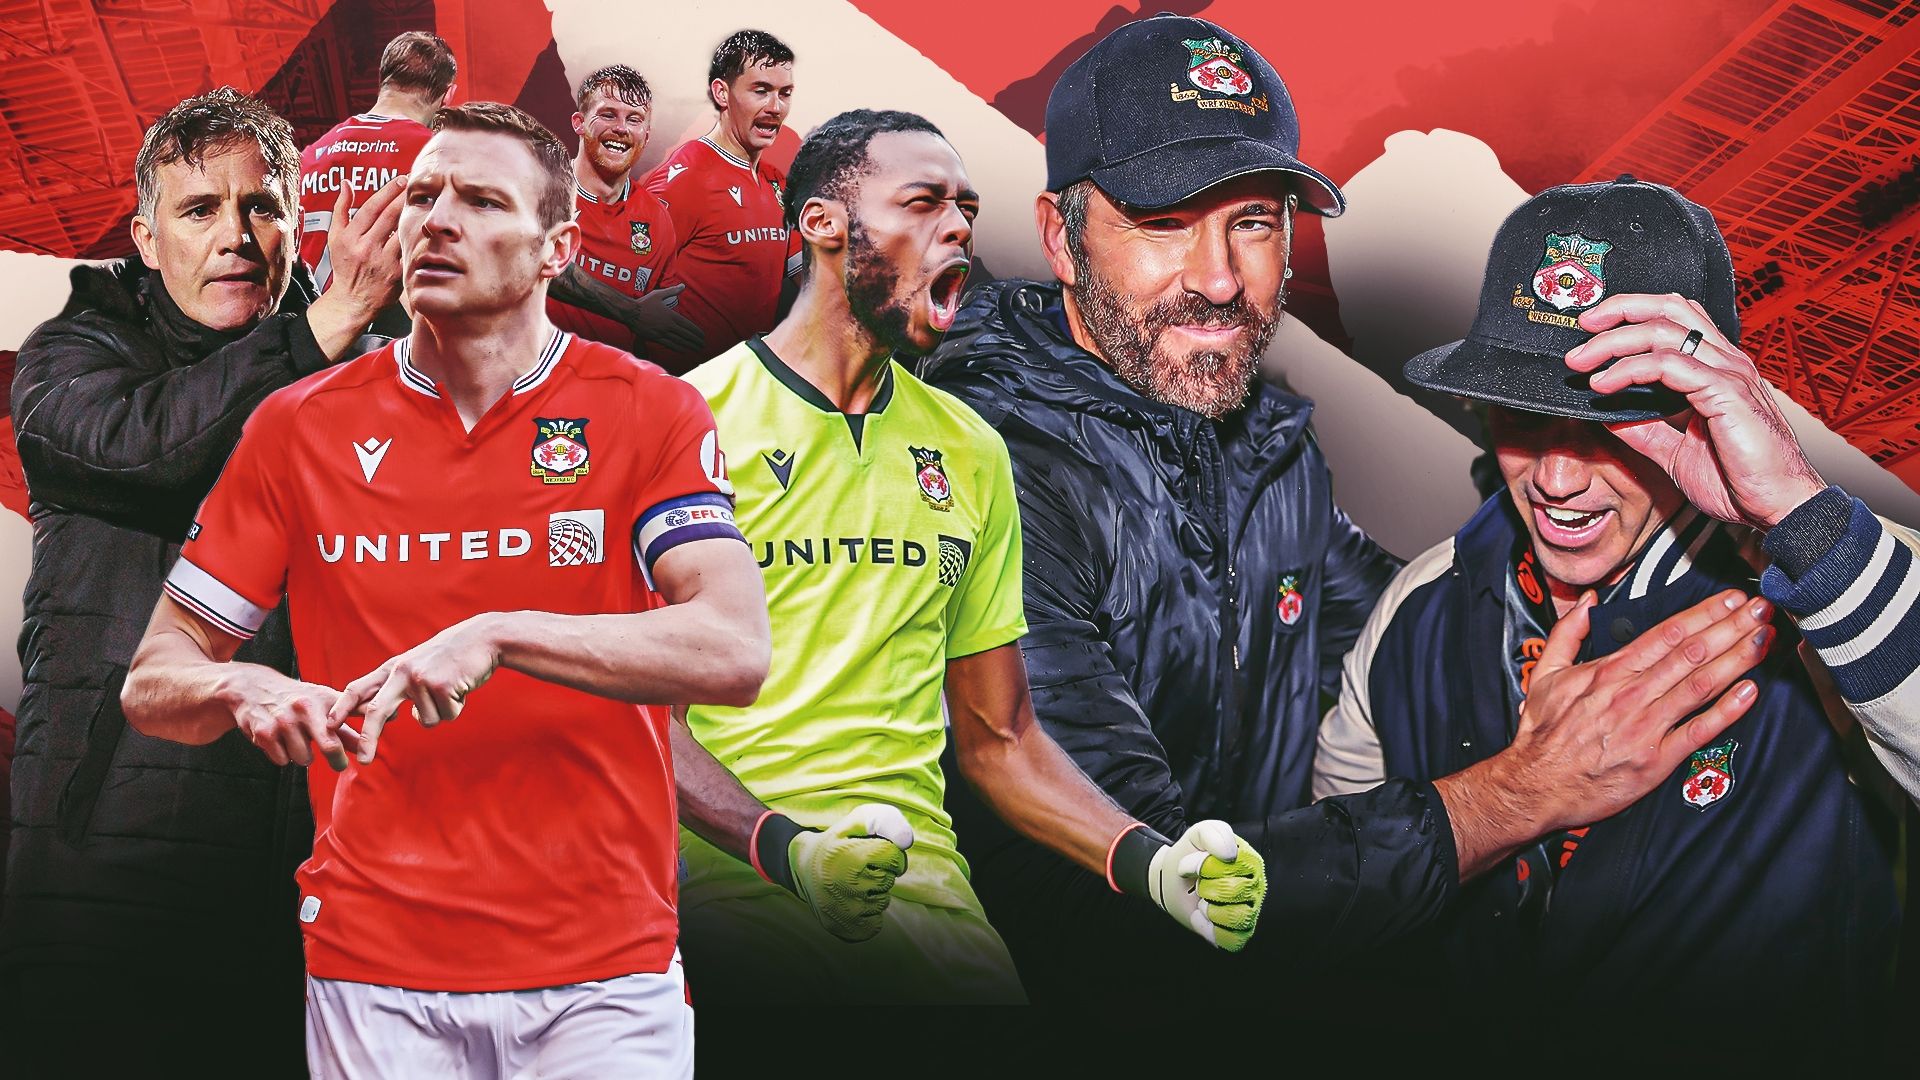 More than Hollywood, Ryan Reynolds, Rob McElhenney & a documentary! Wrexham told they don’t get ‘credit they deserve’ after securing back-to-back promotions